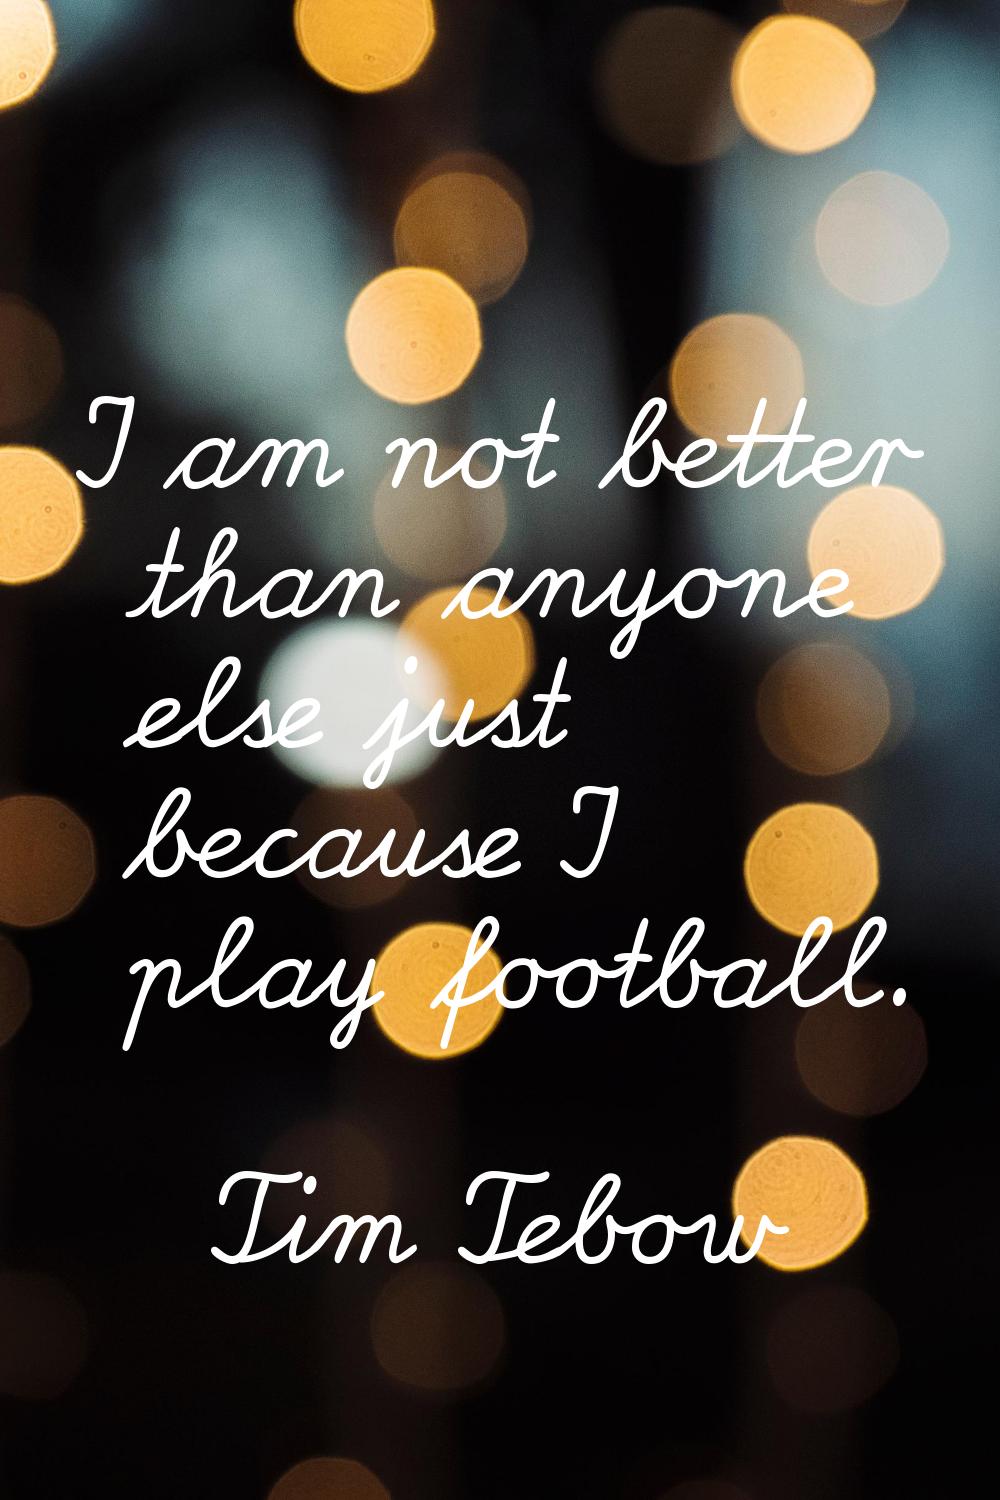 I am not better than anyone else just because I play football.